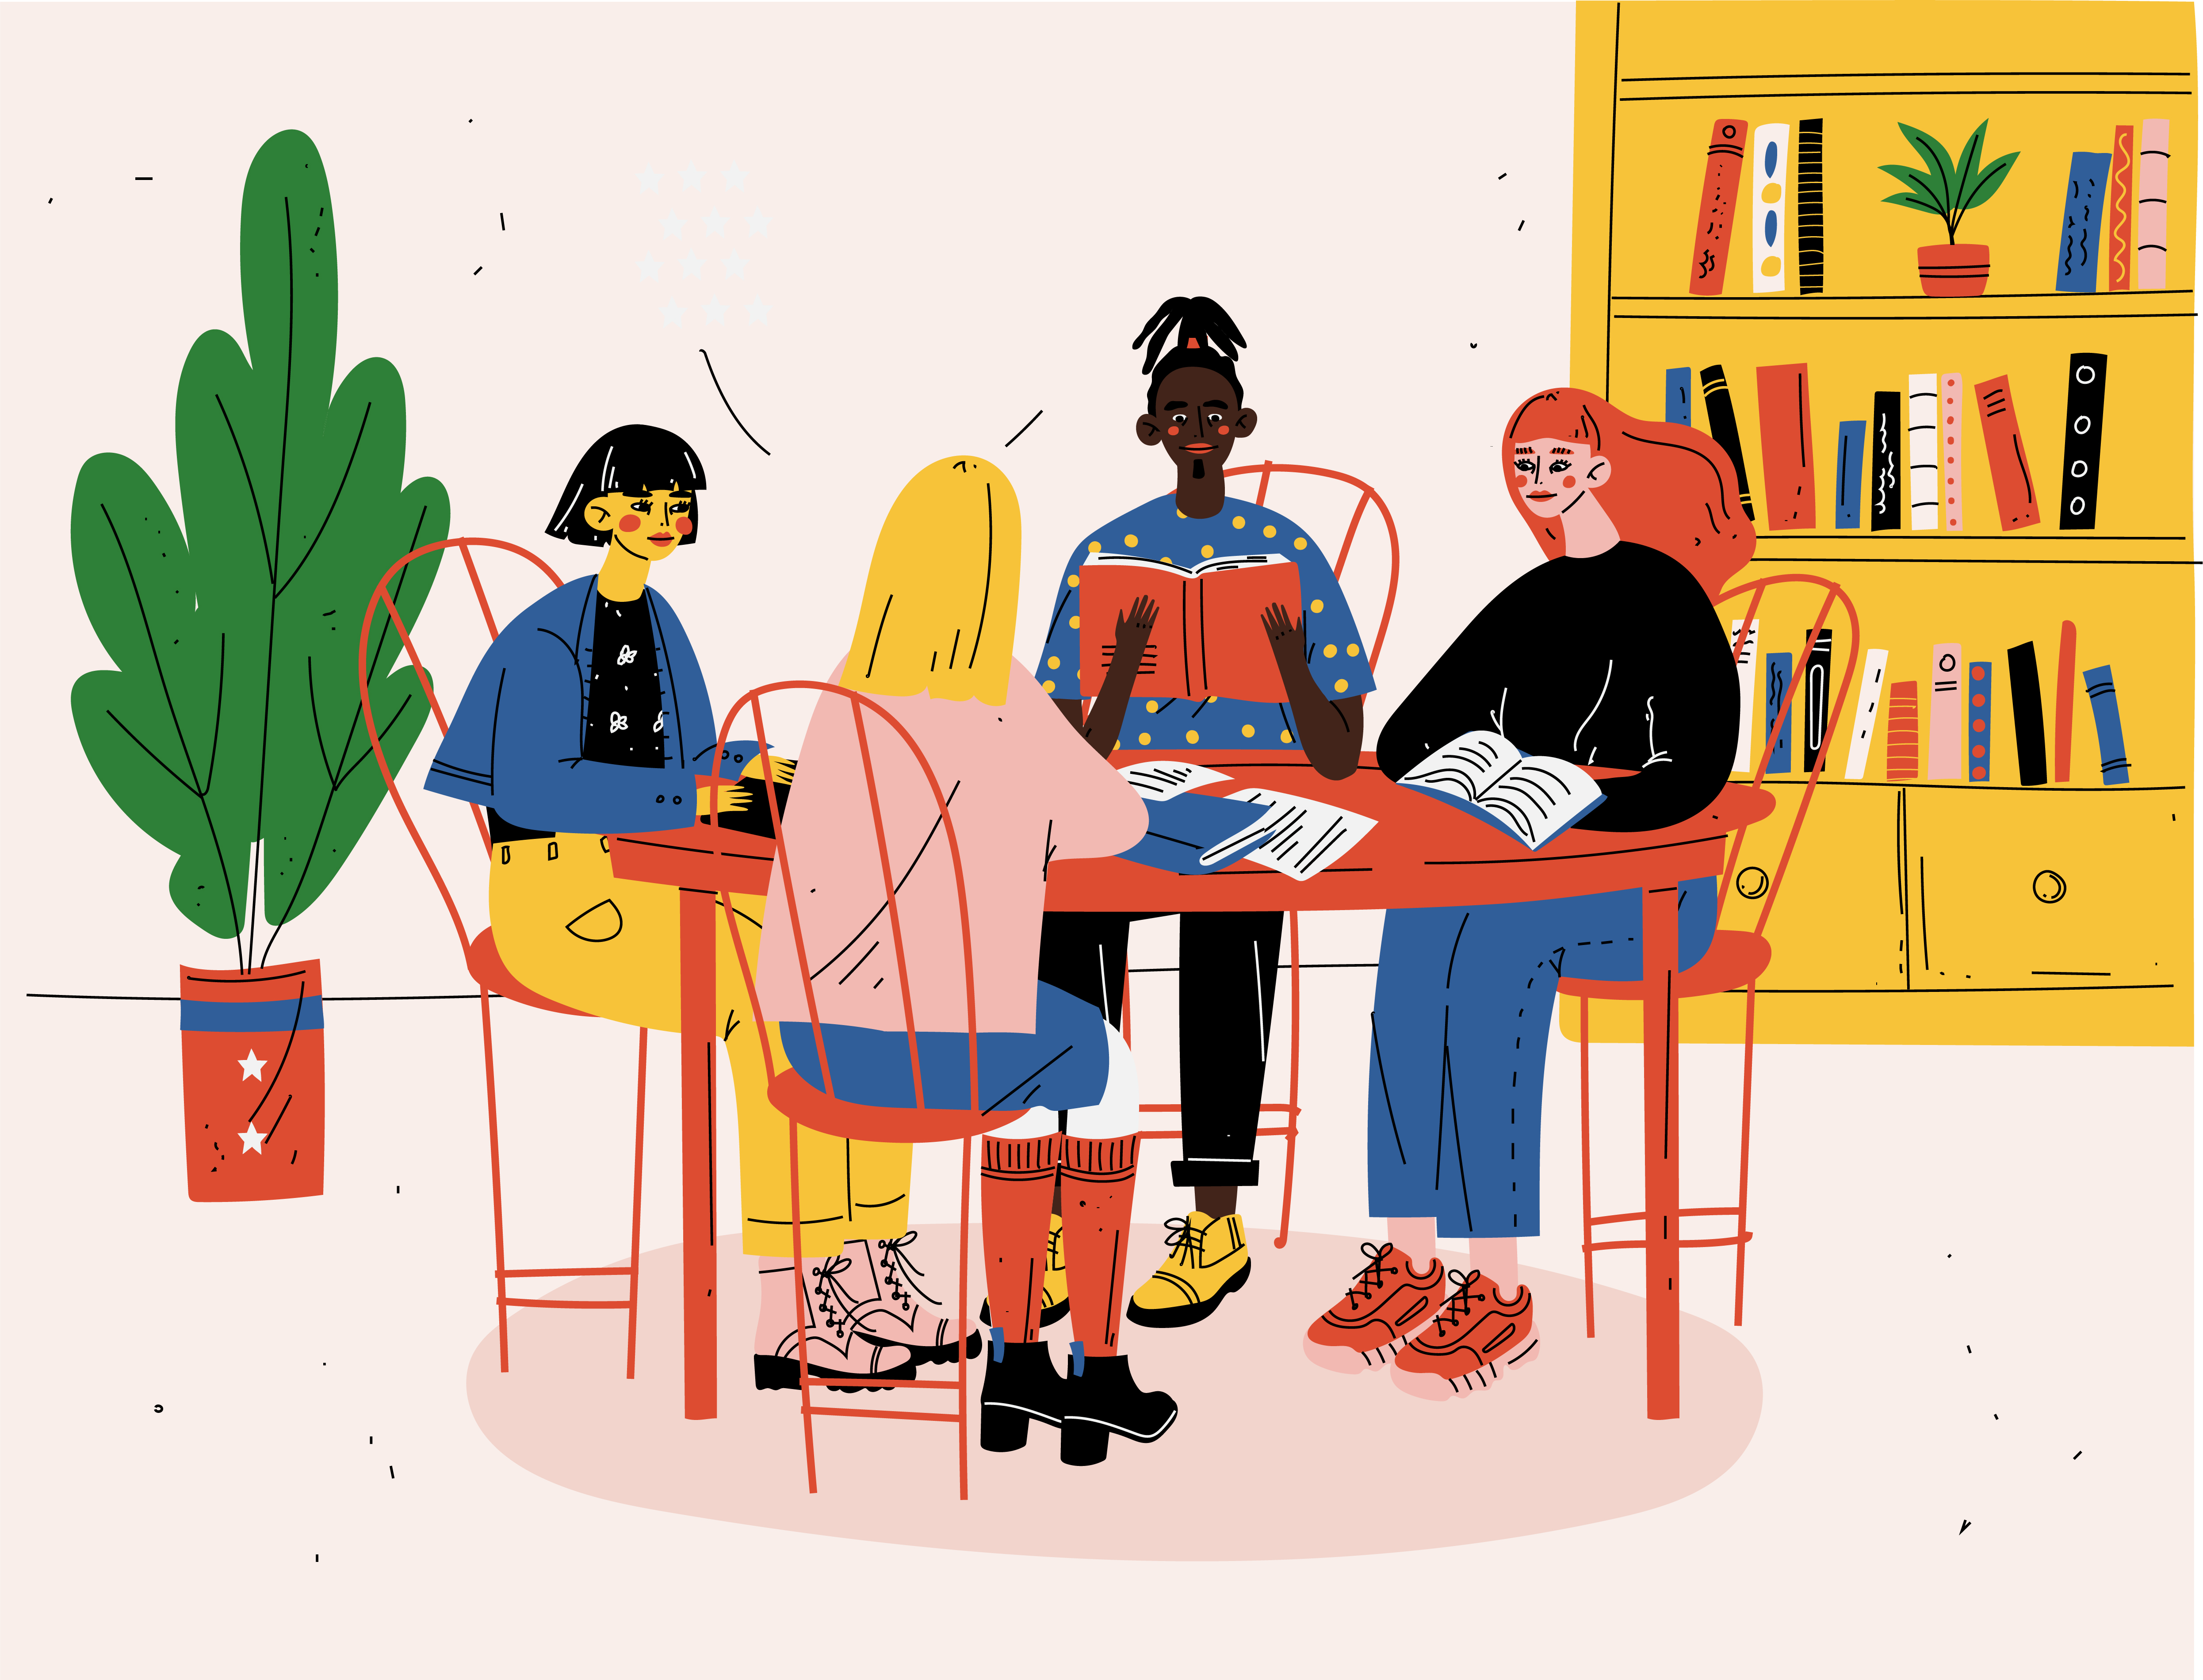 An illustration of a group of young people of diverse identities sitting around a circular table reading books and discussing. A bookshelf and a fig plant are in the background.